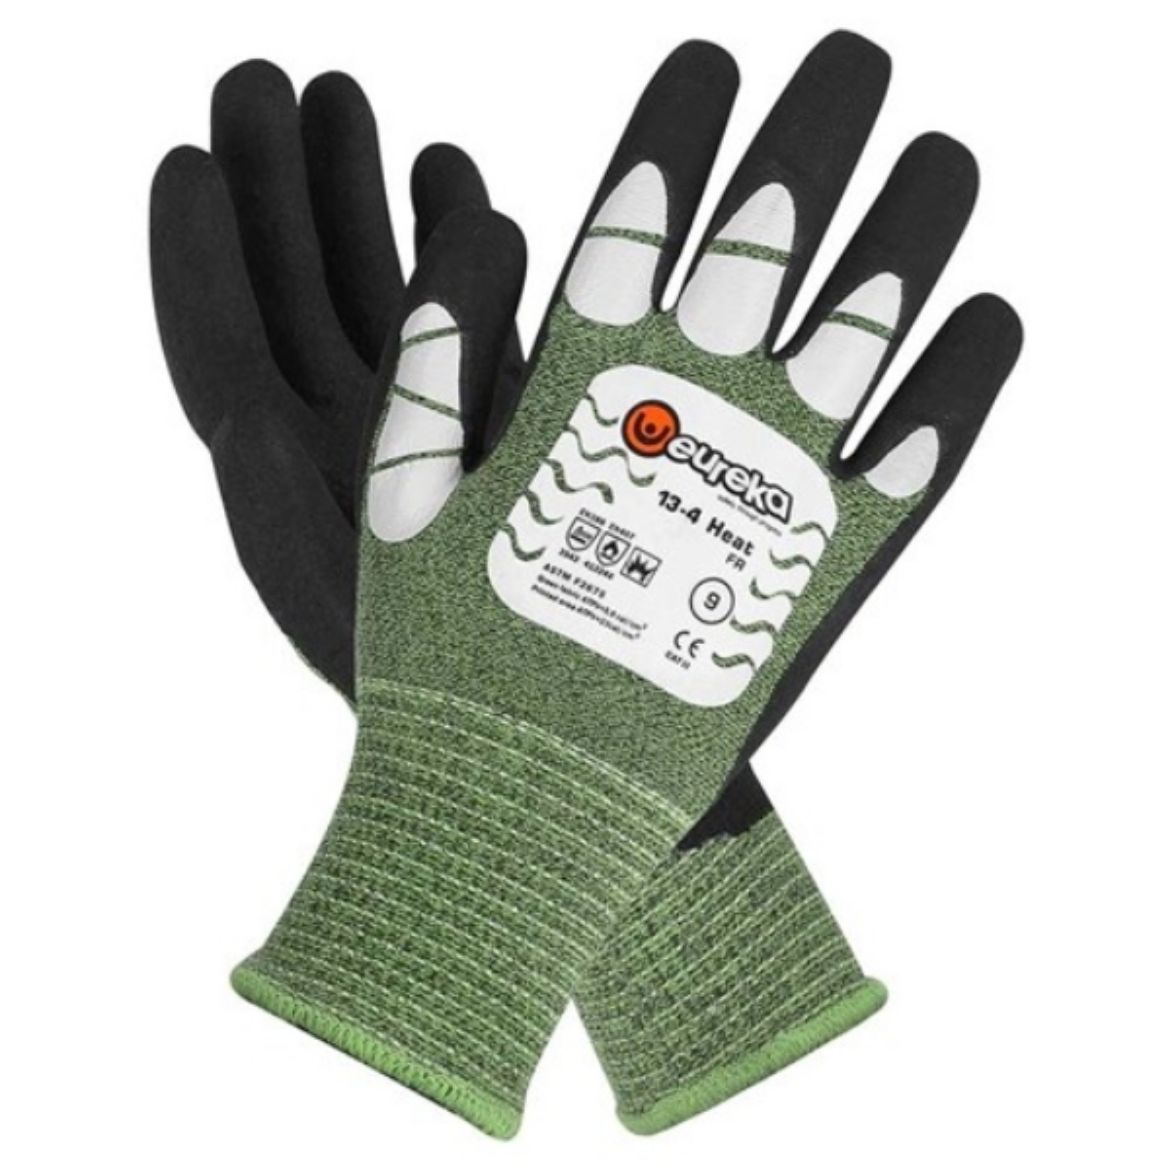 Picture of EUREKA 13-4 HEAT FR ARC FLASH + FLAME RESISTANT GLOVES